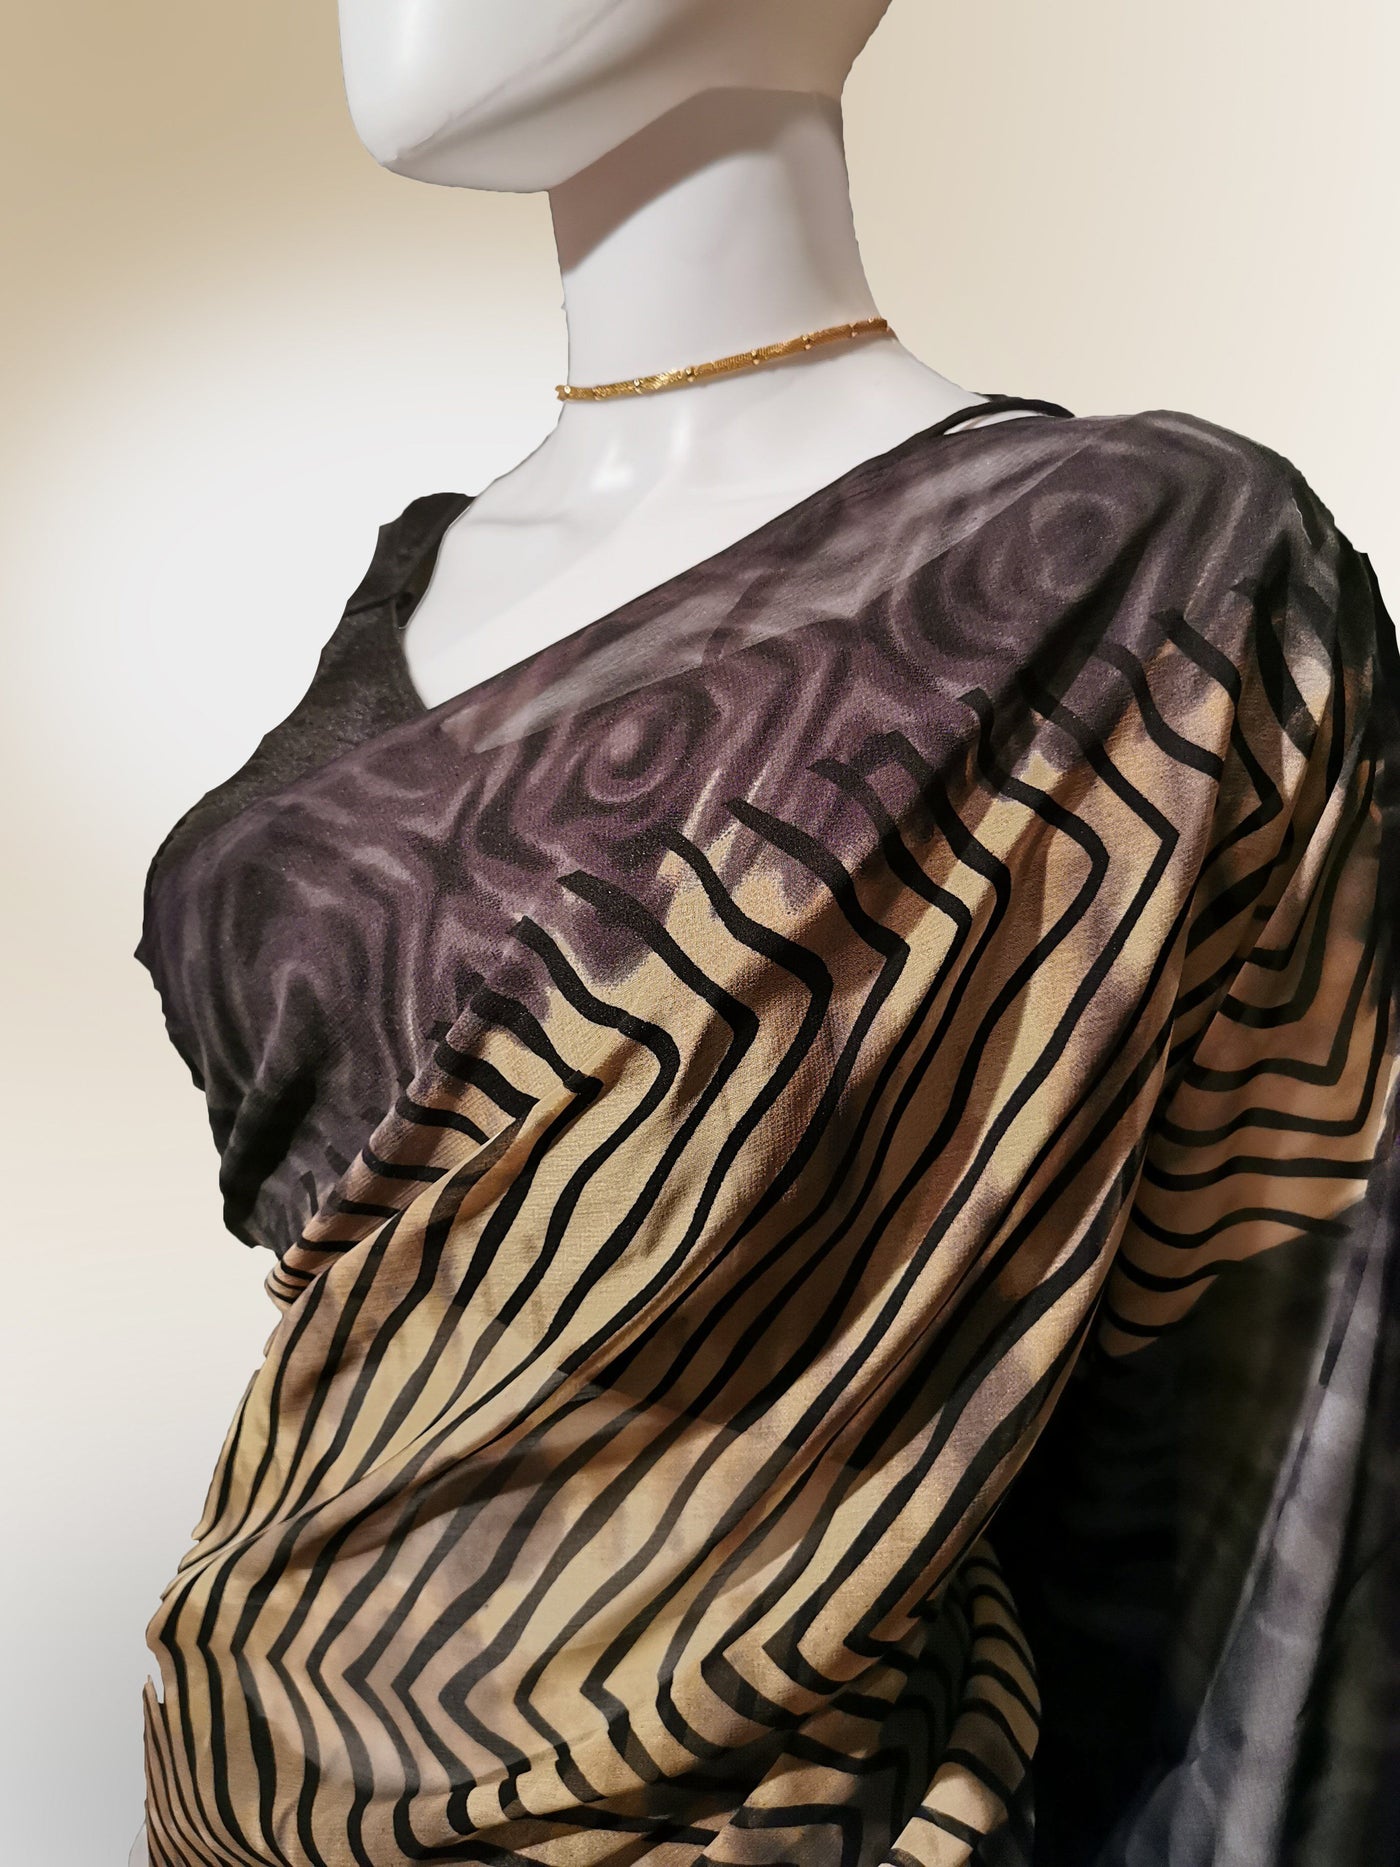 Saree in Coffee Brown with Striped Print Design Indian Clothing in Denver, CO, Aurora, CO, Boulder, CO, Fort Collins, CO, Colorado Springs, CO, Parker, CO, Highlands Ranch, CO, Cherry Creek, CO, Centennial, CO, and Longmont, CO. NATIONWIDE SHIPPING USA- India Fashion X